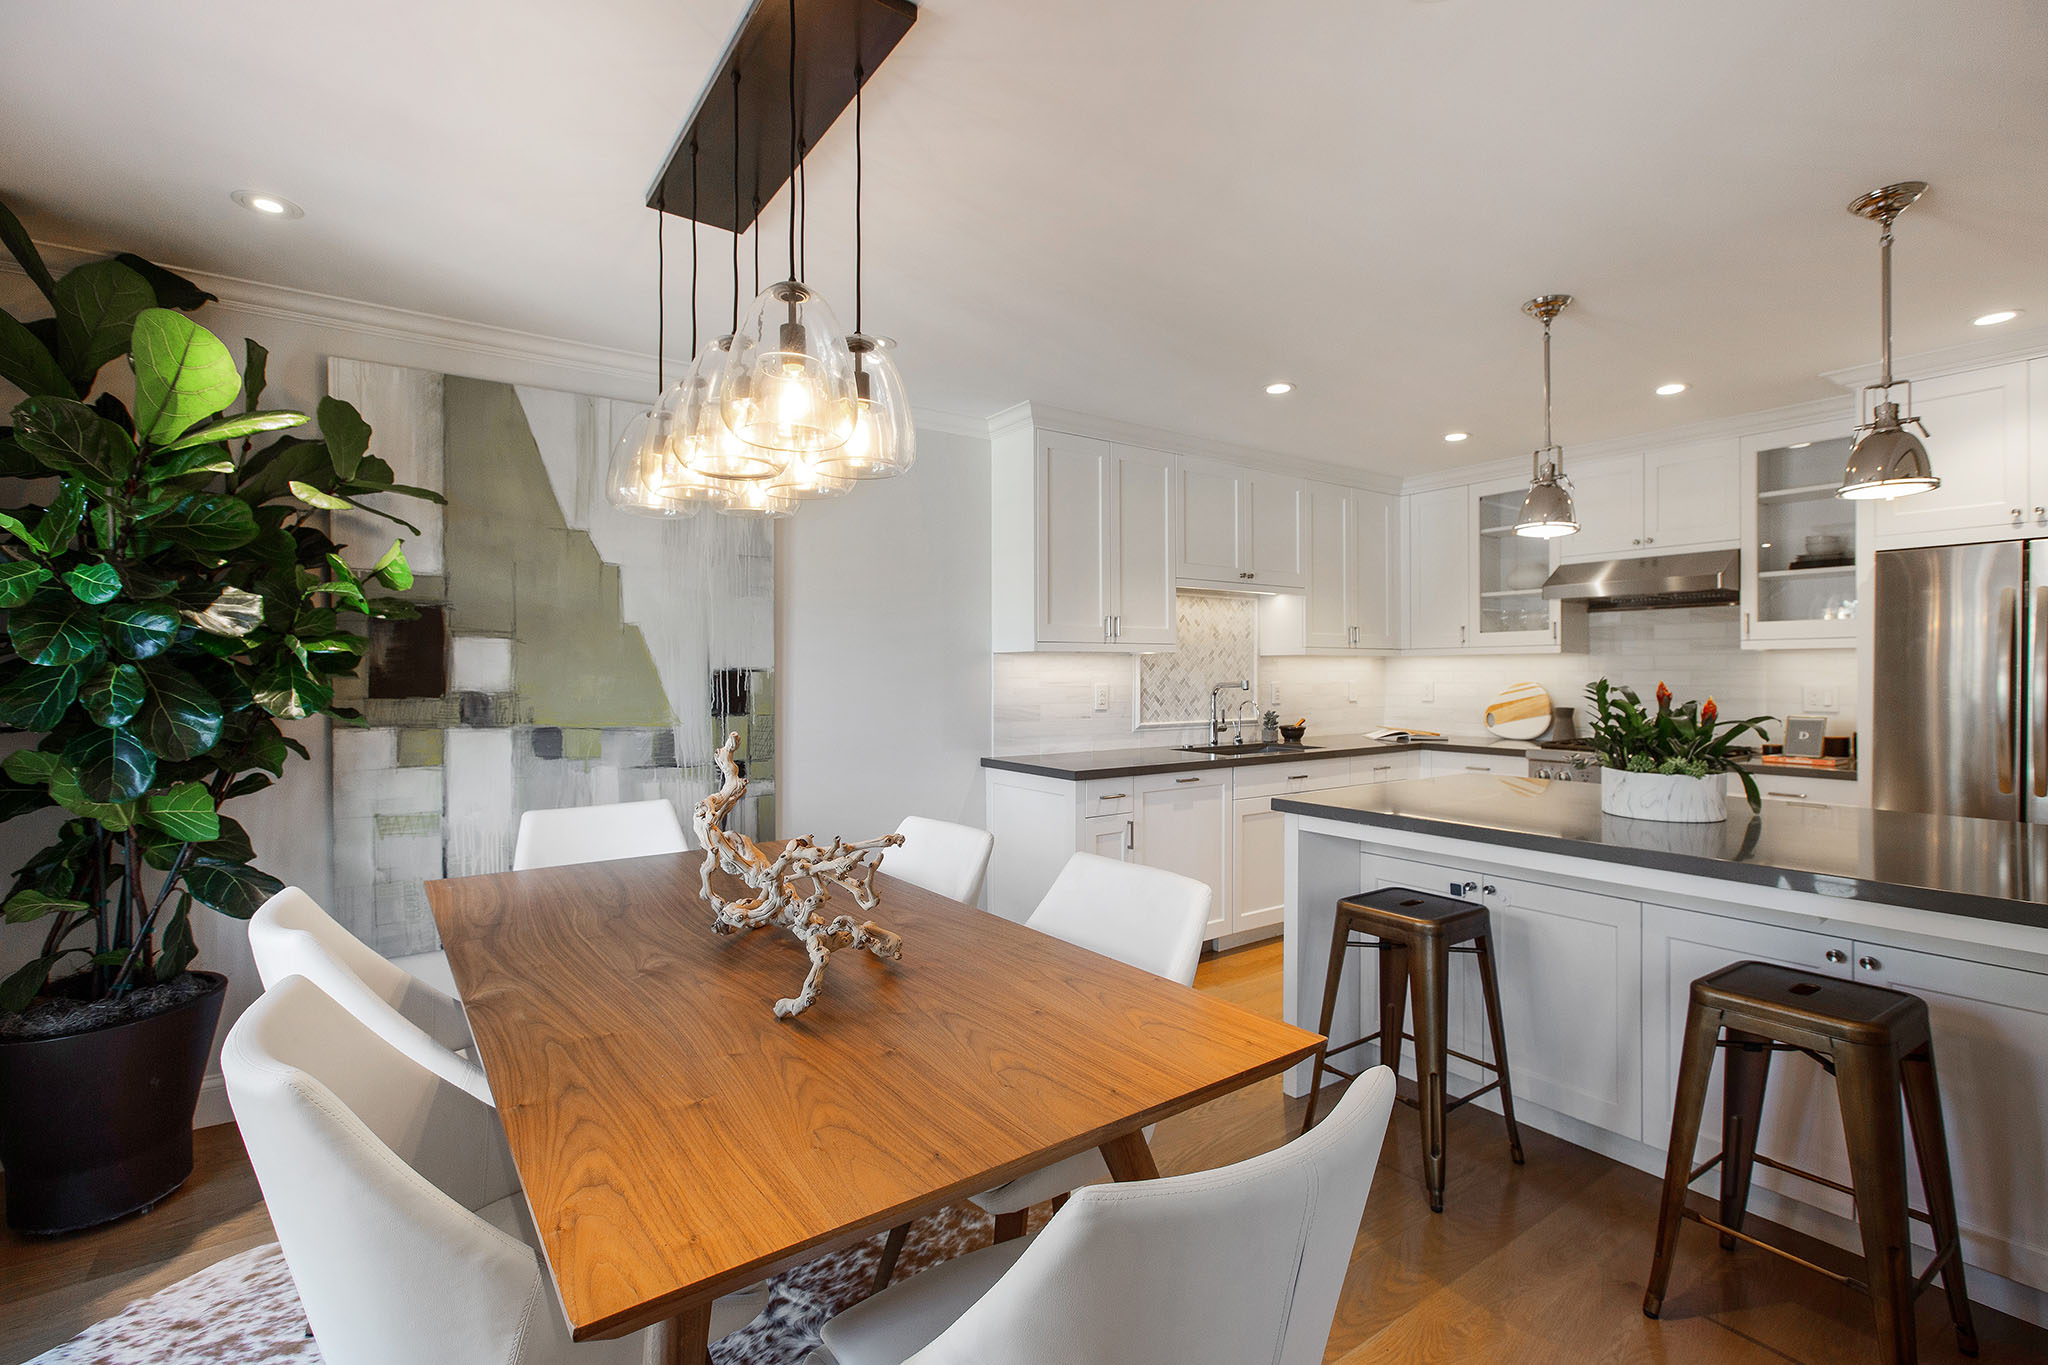 Property Photo: On the dining room side of the kitchen island there are two stools for seating.